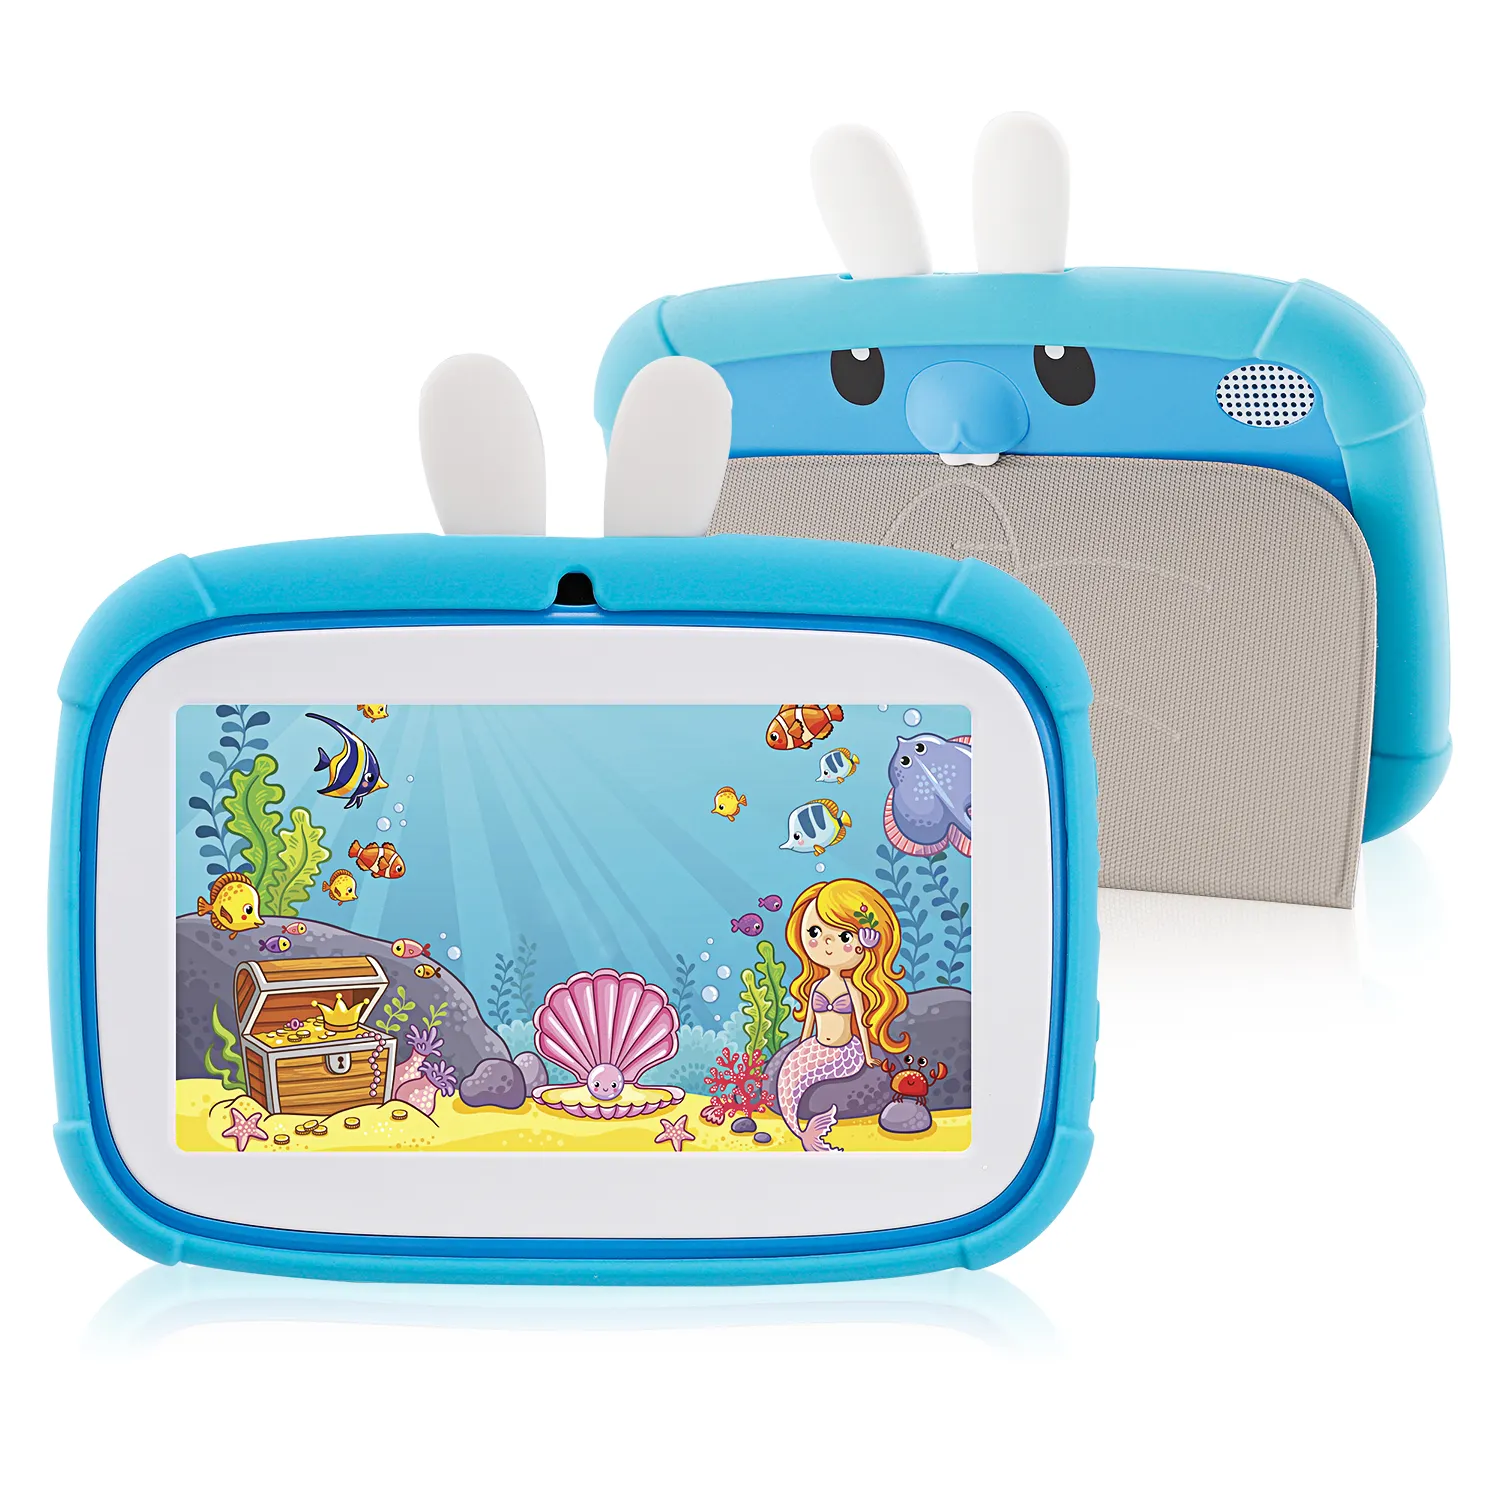 Best Selling Cheap 7 Inch Kids Education Tablet 1024*600 Touchscreen Display Tablet PC